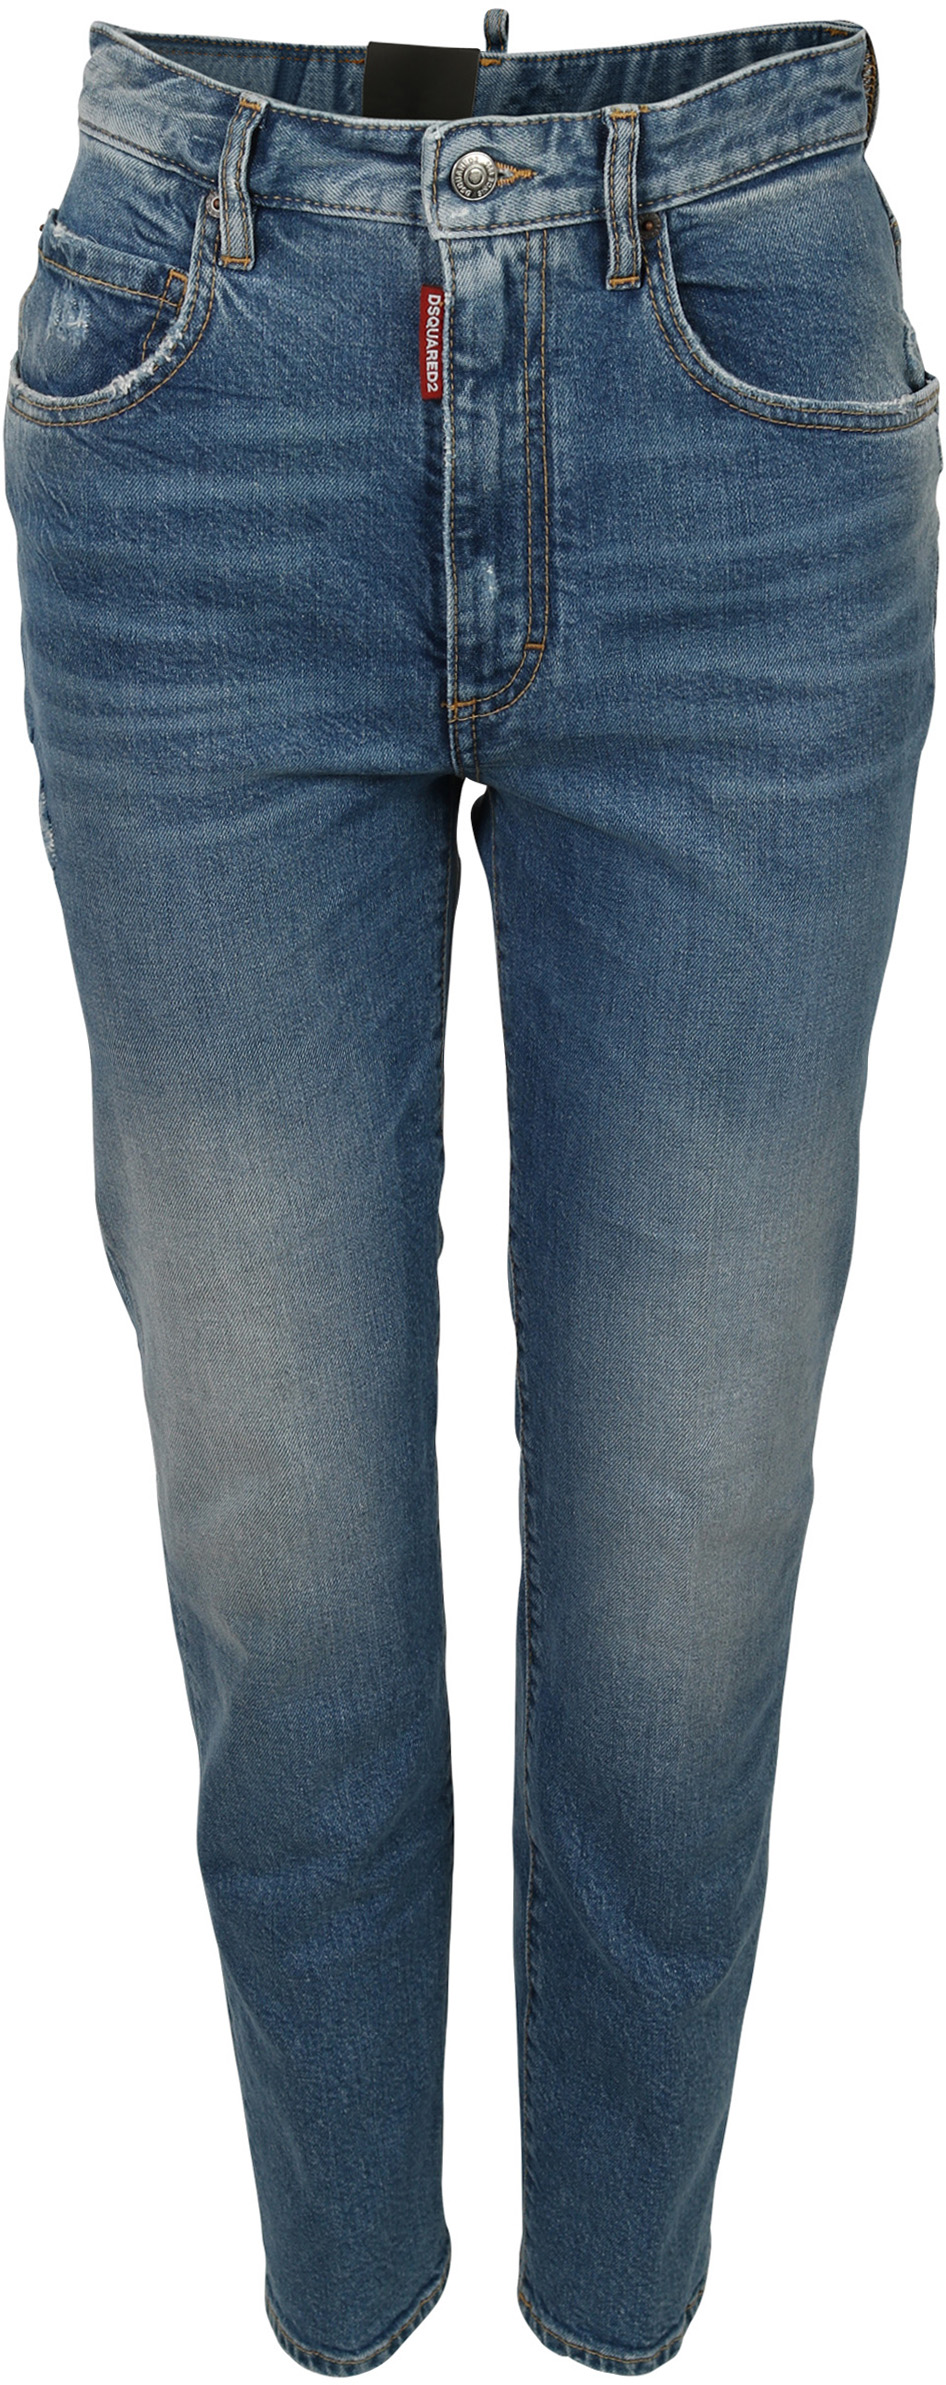 Dsquared Jeans Tight Cropped Light Blue Washed